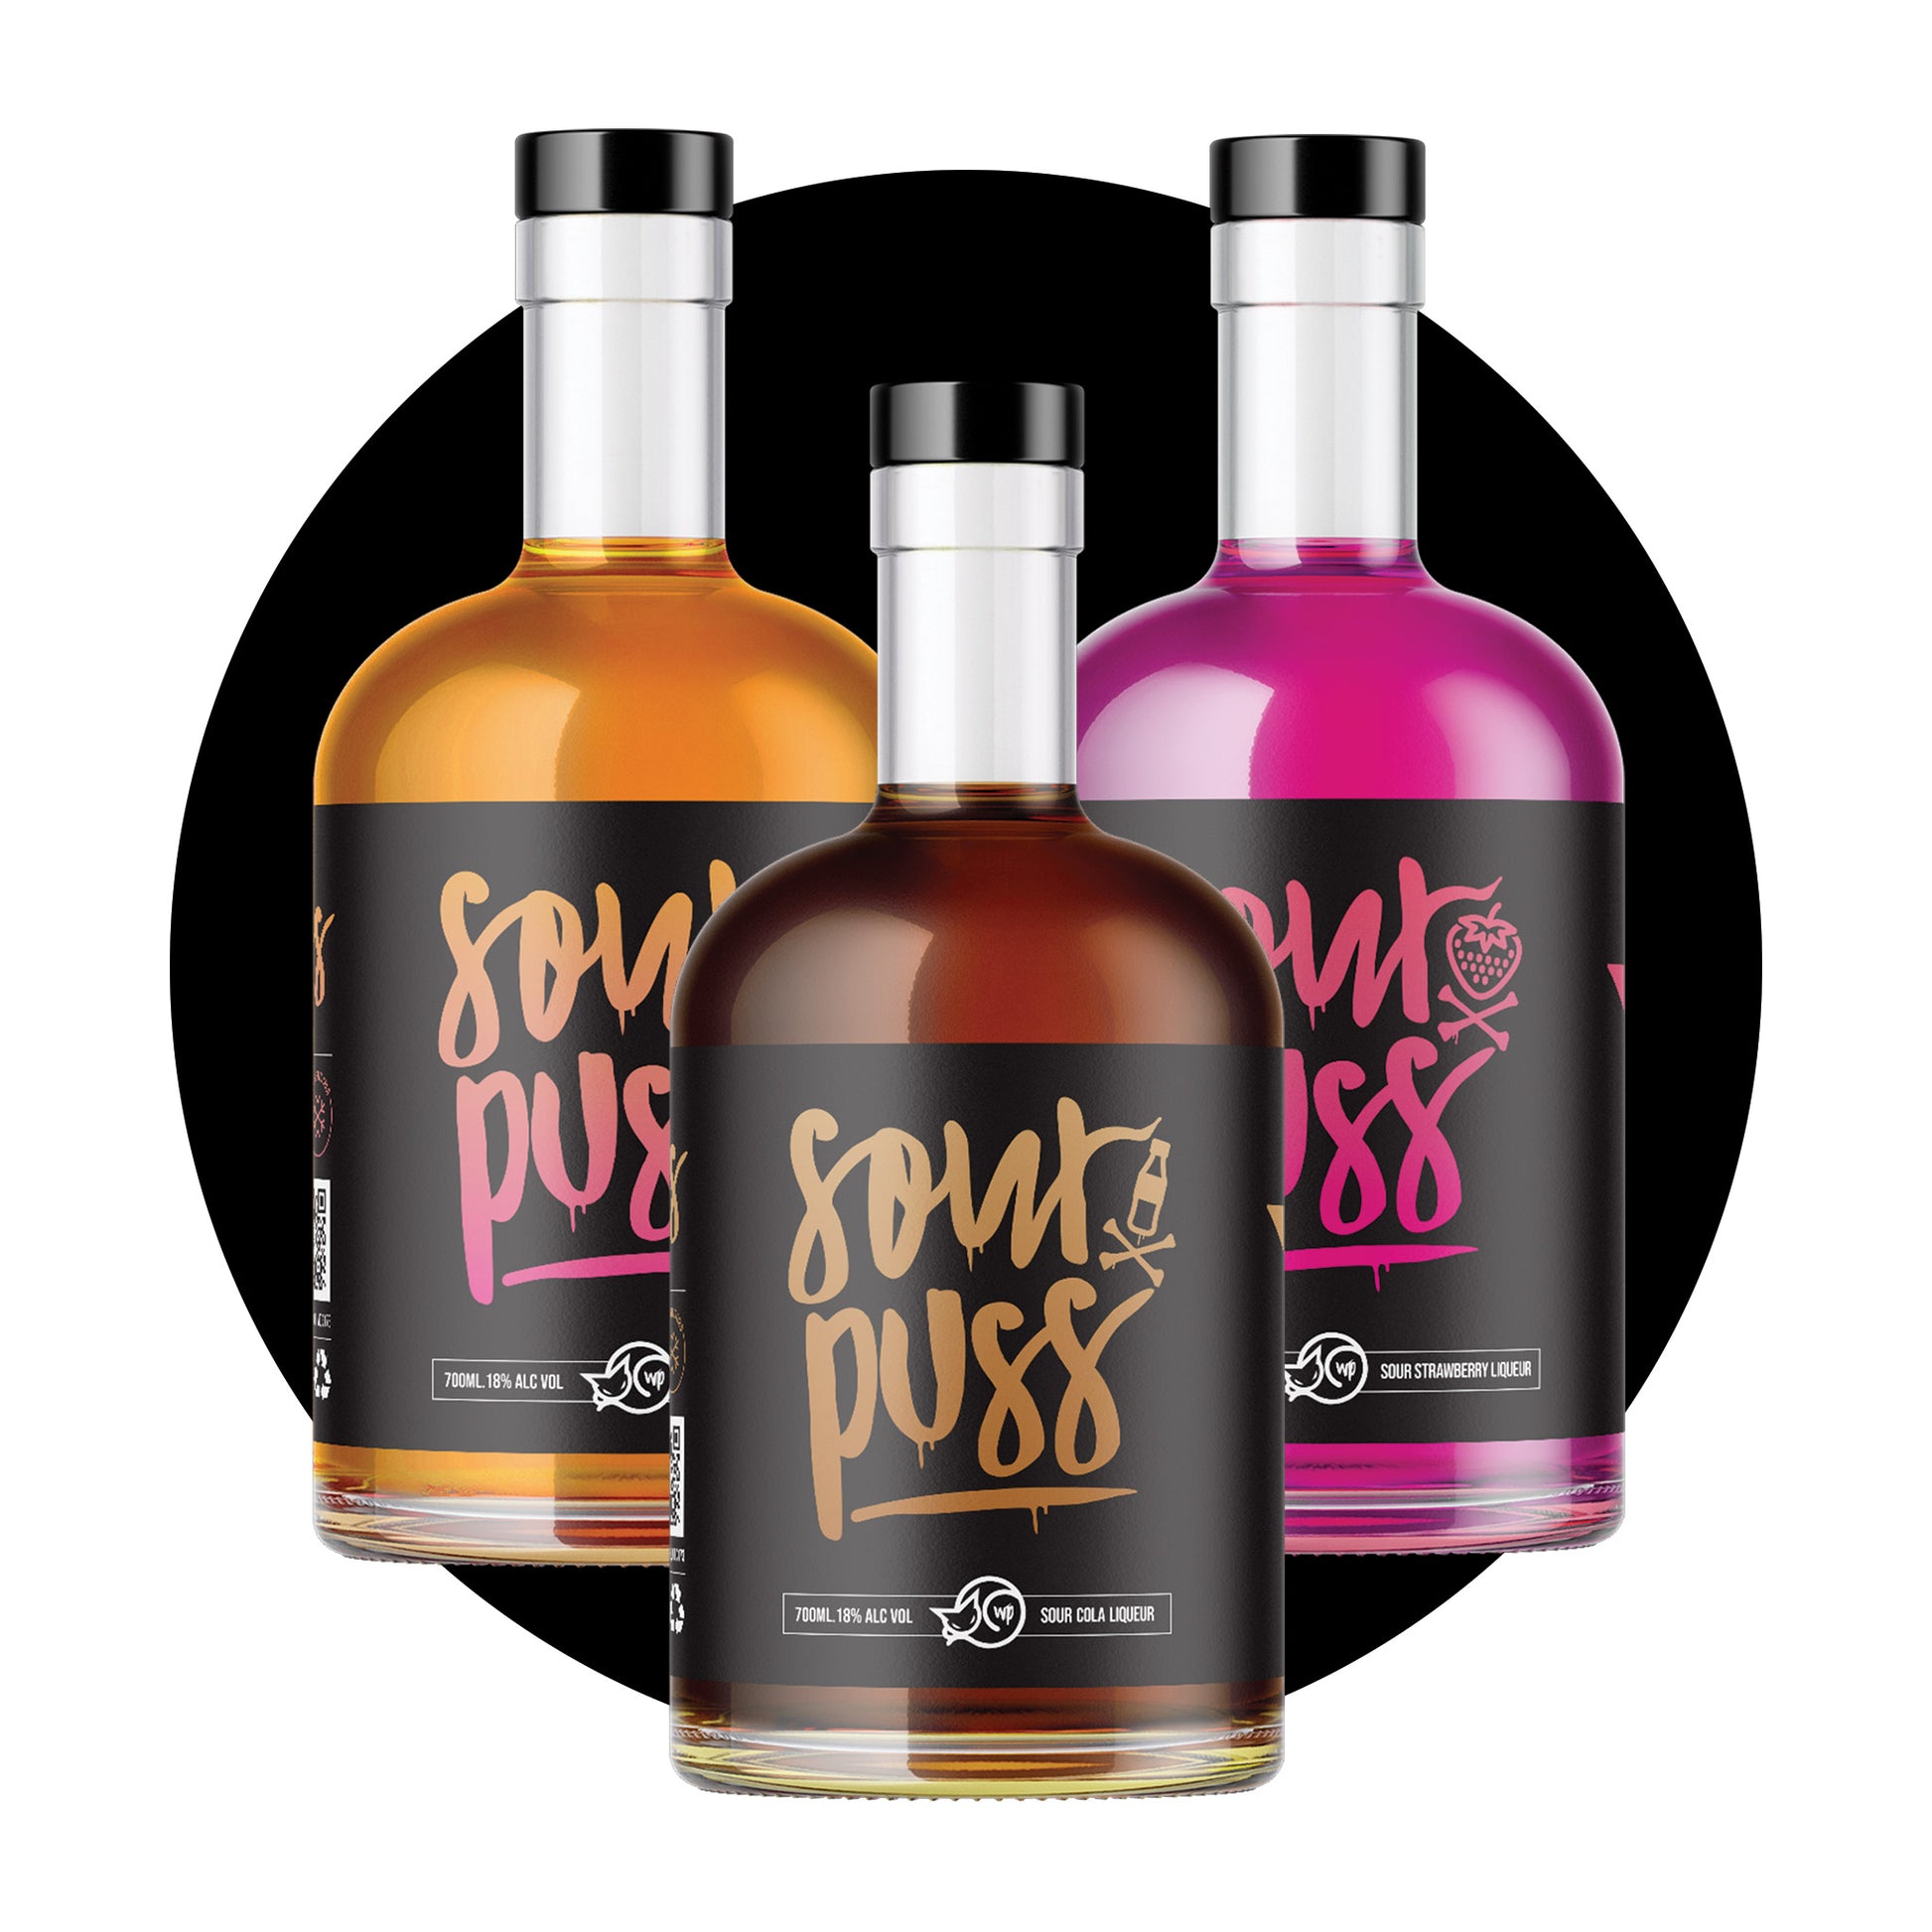 Sour Puss New Flavors 3 Pack - 80Proof 